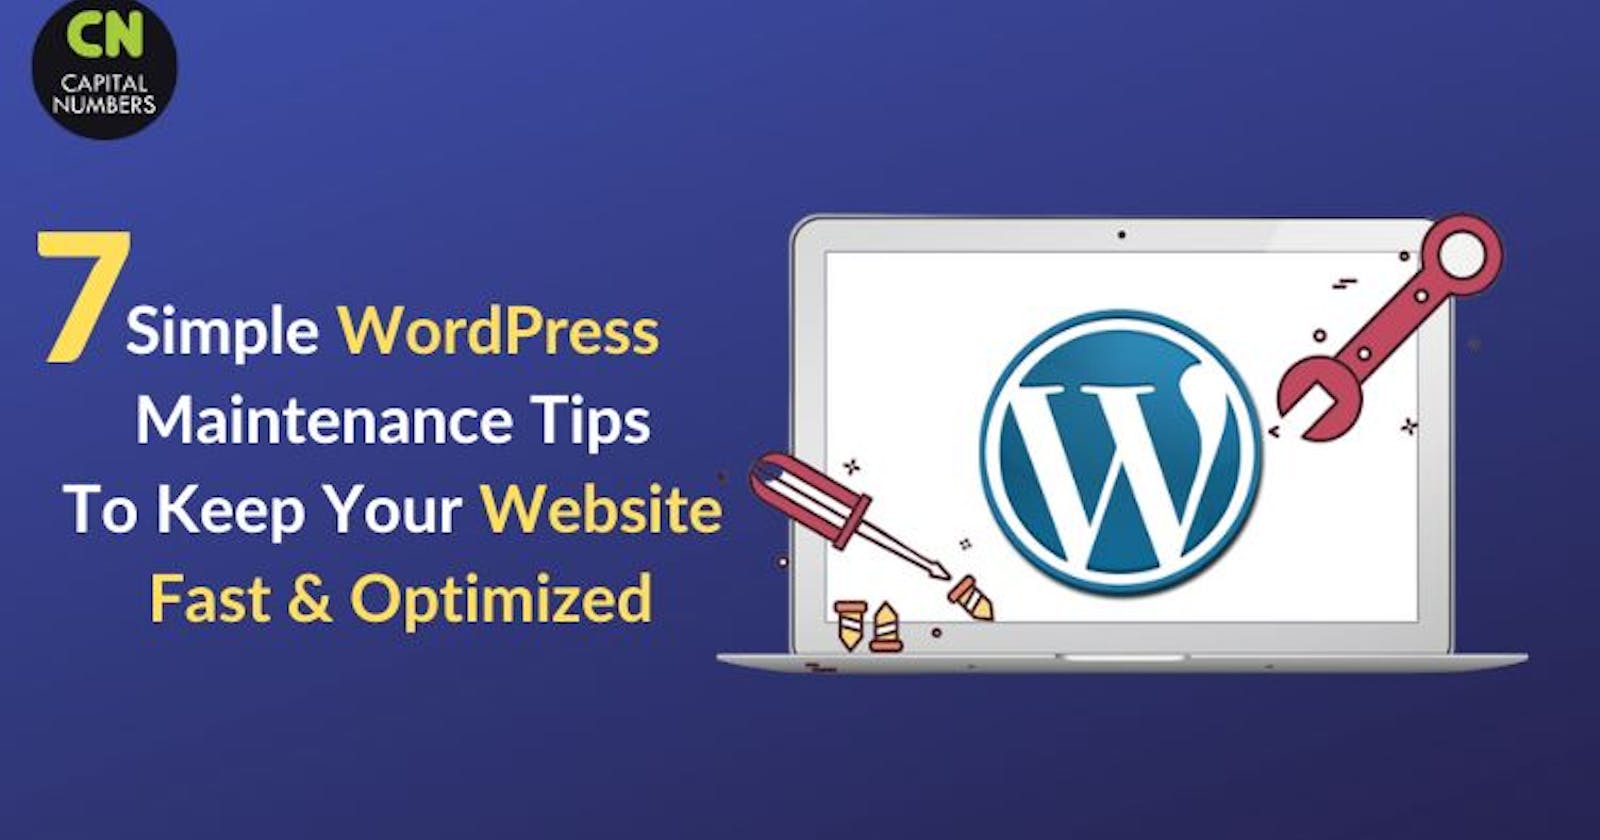 7 Simple WordPress Maintenance Tips To Keep Your Website Fast & Optimized